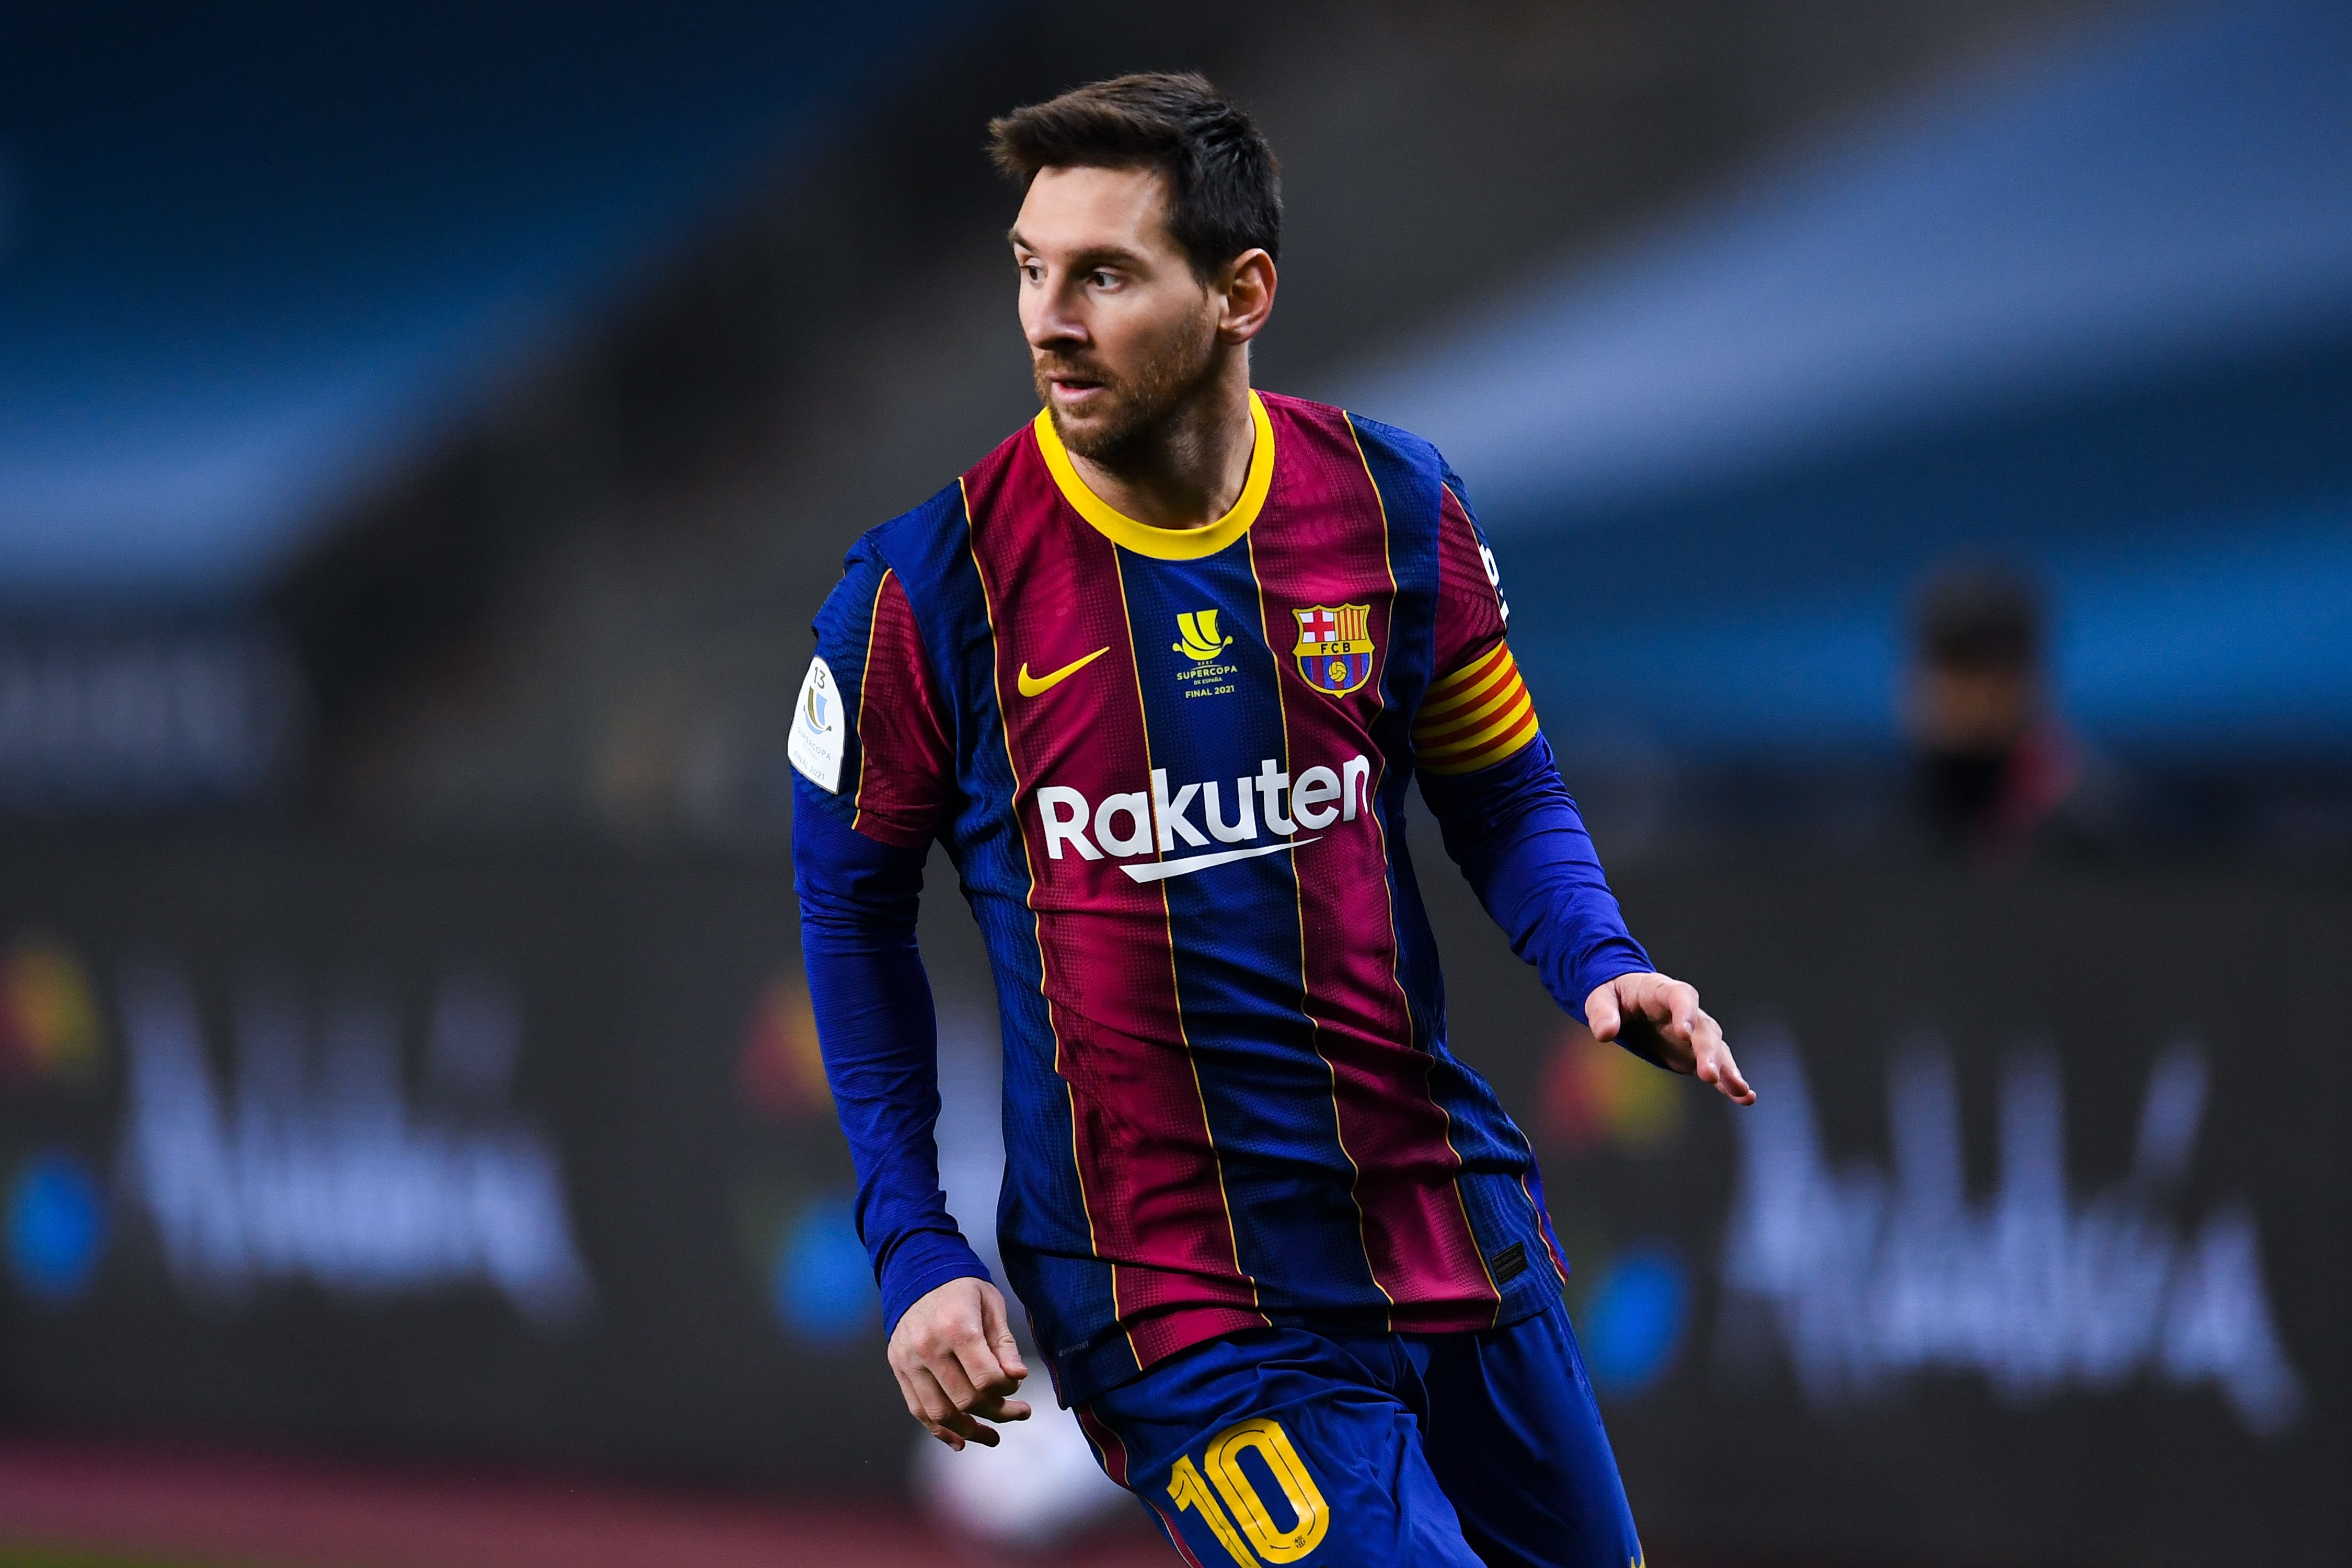 Lionel Messi After Report Reveals Star Forward S Record 672 Million Contract Barcelona Denies Responsibility For Leak Cnn